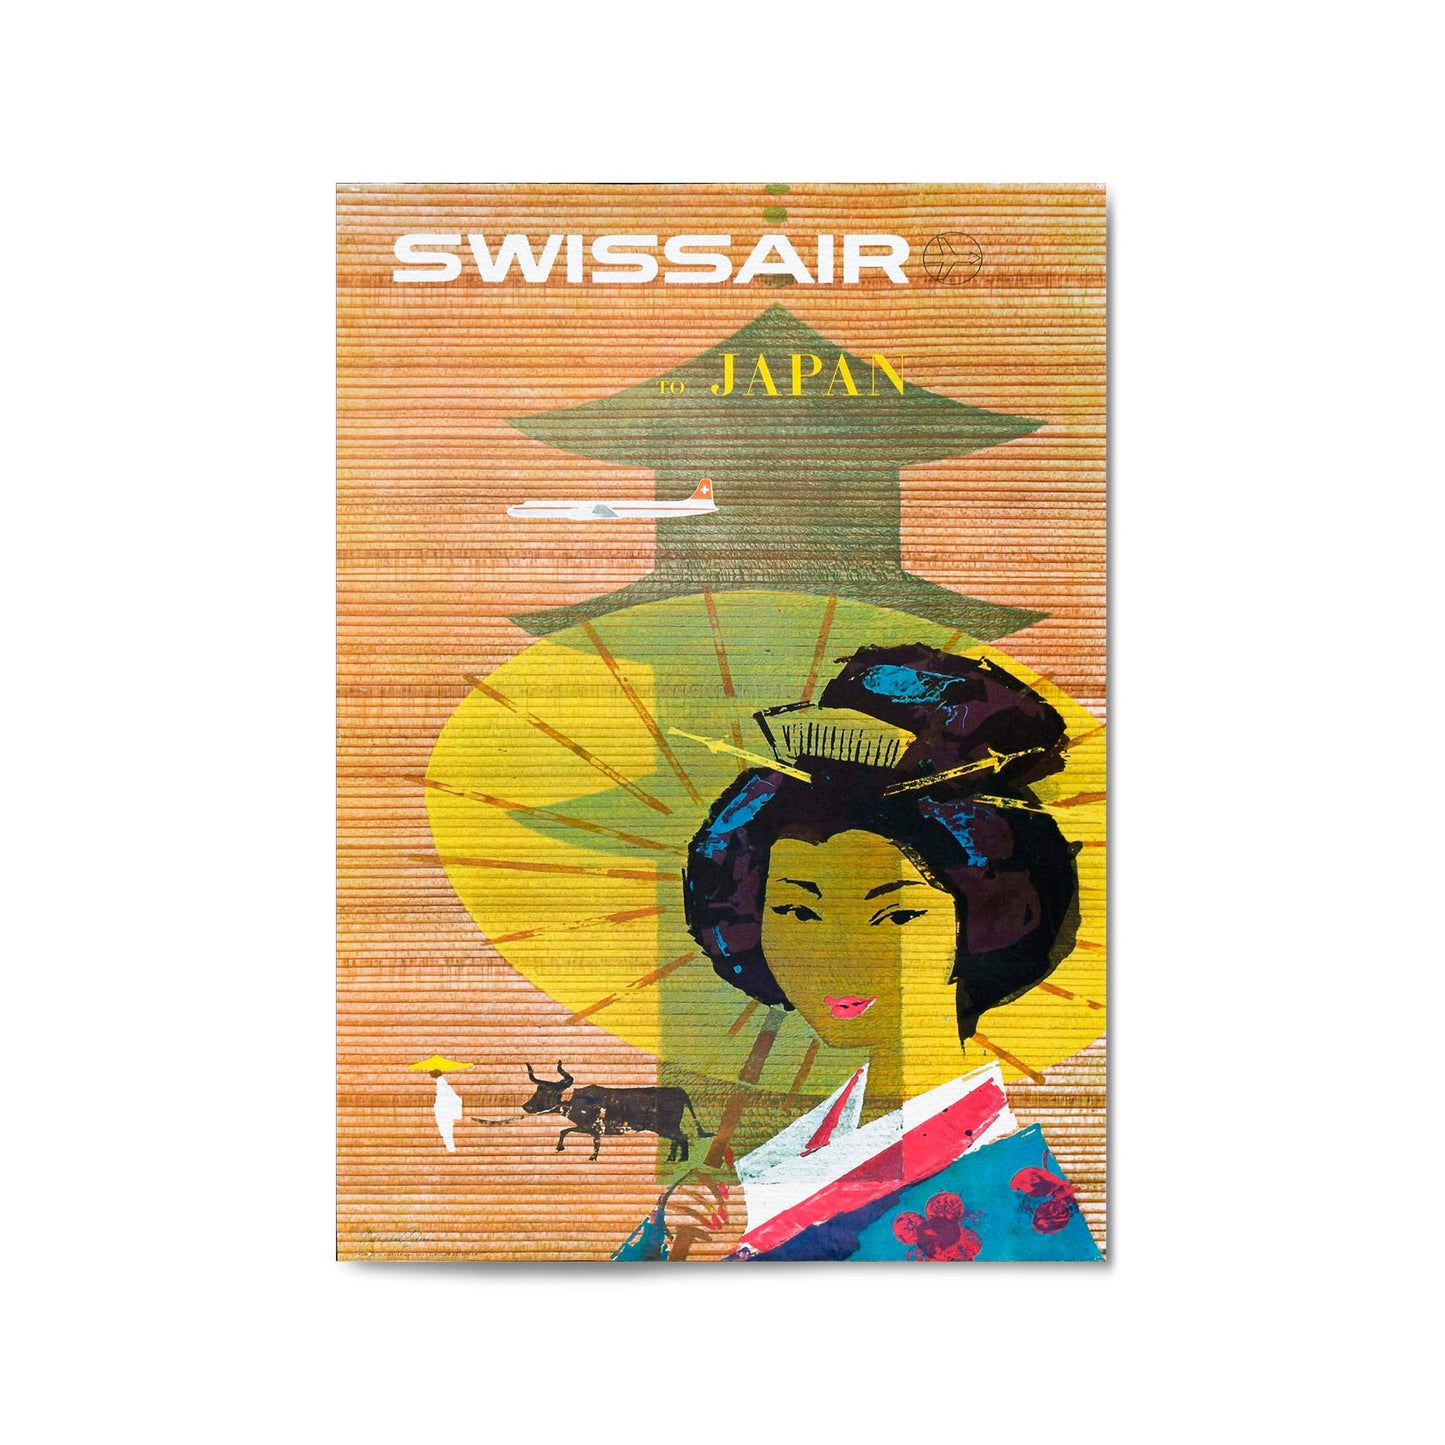 Swissair to Japan Vintage Travel Advert Wall Art - The Affordable Art Company